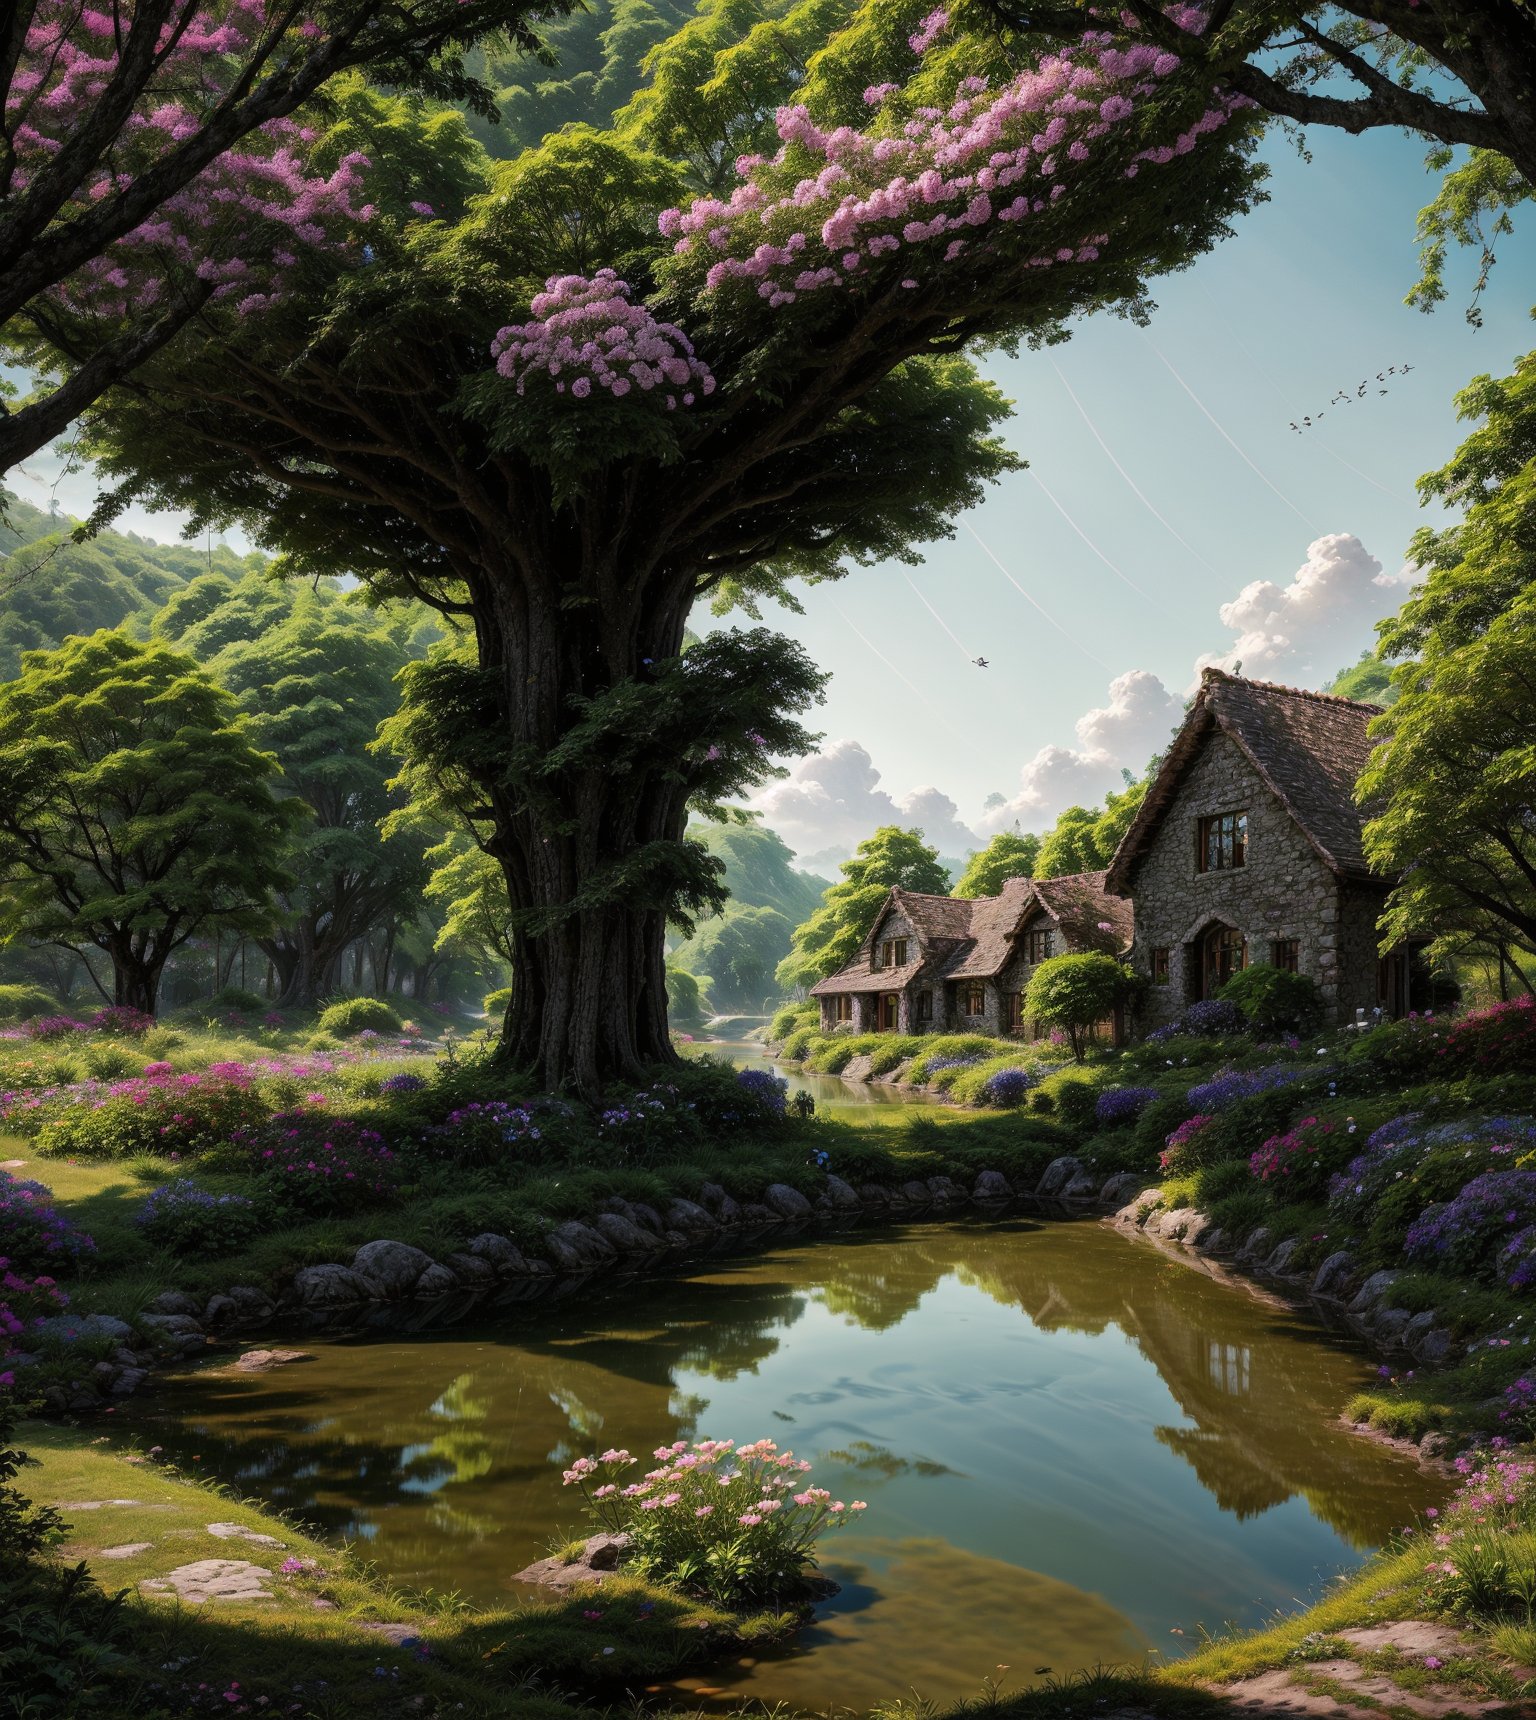 8K Anime style,  The gentle flow of the river mirrors the beauty of the stone country house, its waters shimmering with reflections of the surrounding greenery and blooming flowers of all colours, all depicted in an anime-inspired digital art style that brings a touch of whimsy to the idyllic setting,photorealistic,Nature,High detailed 